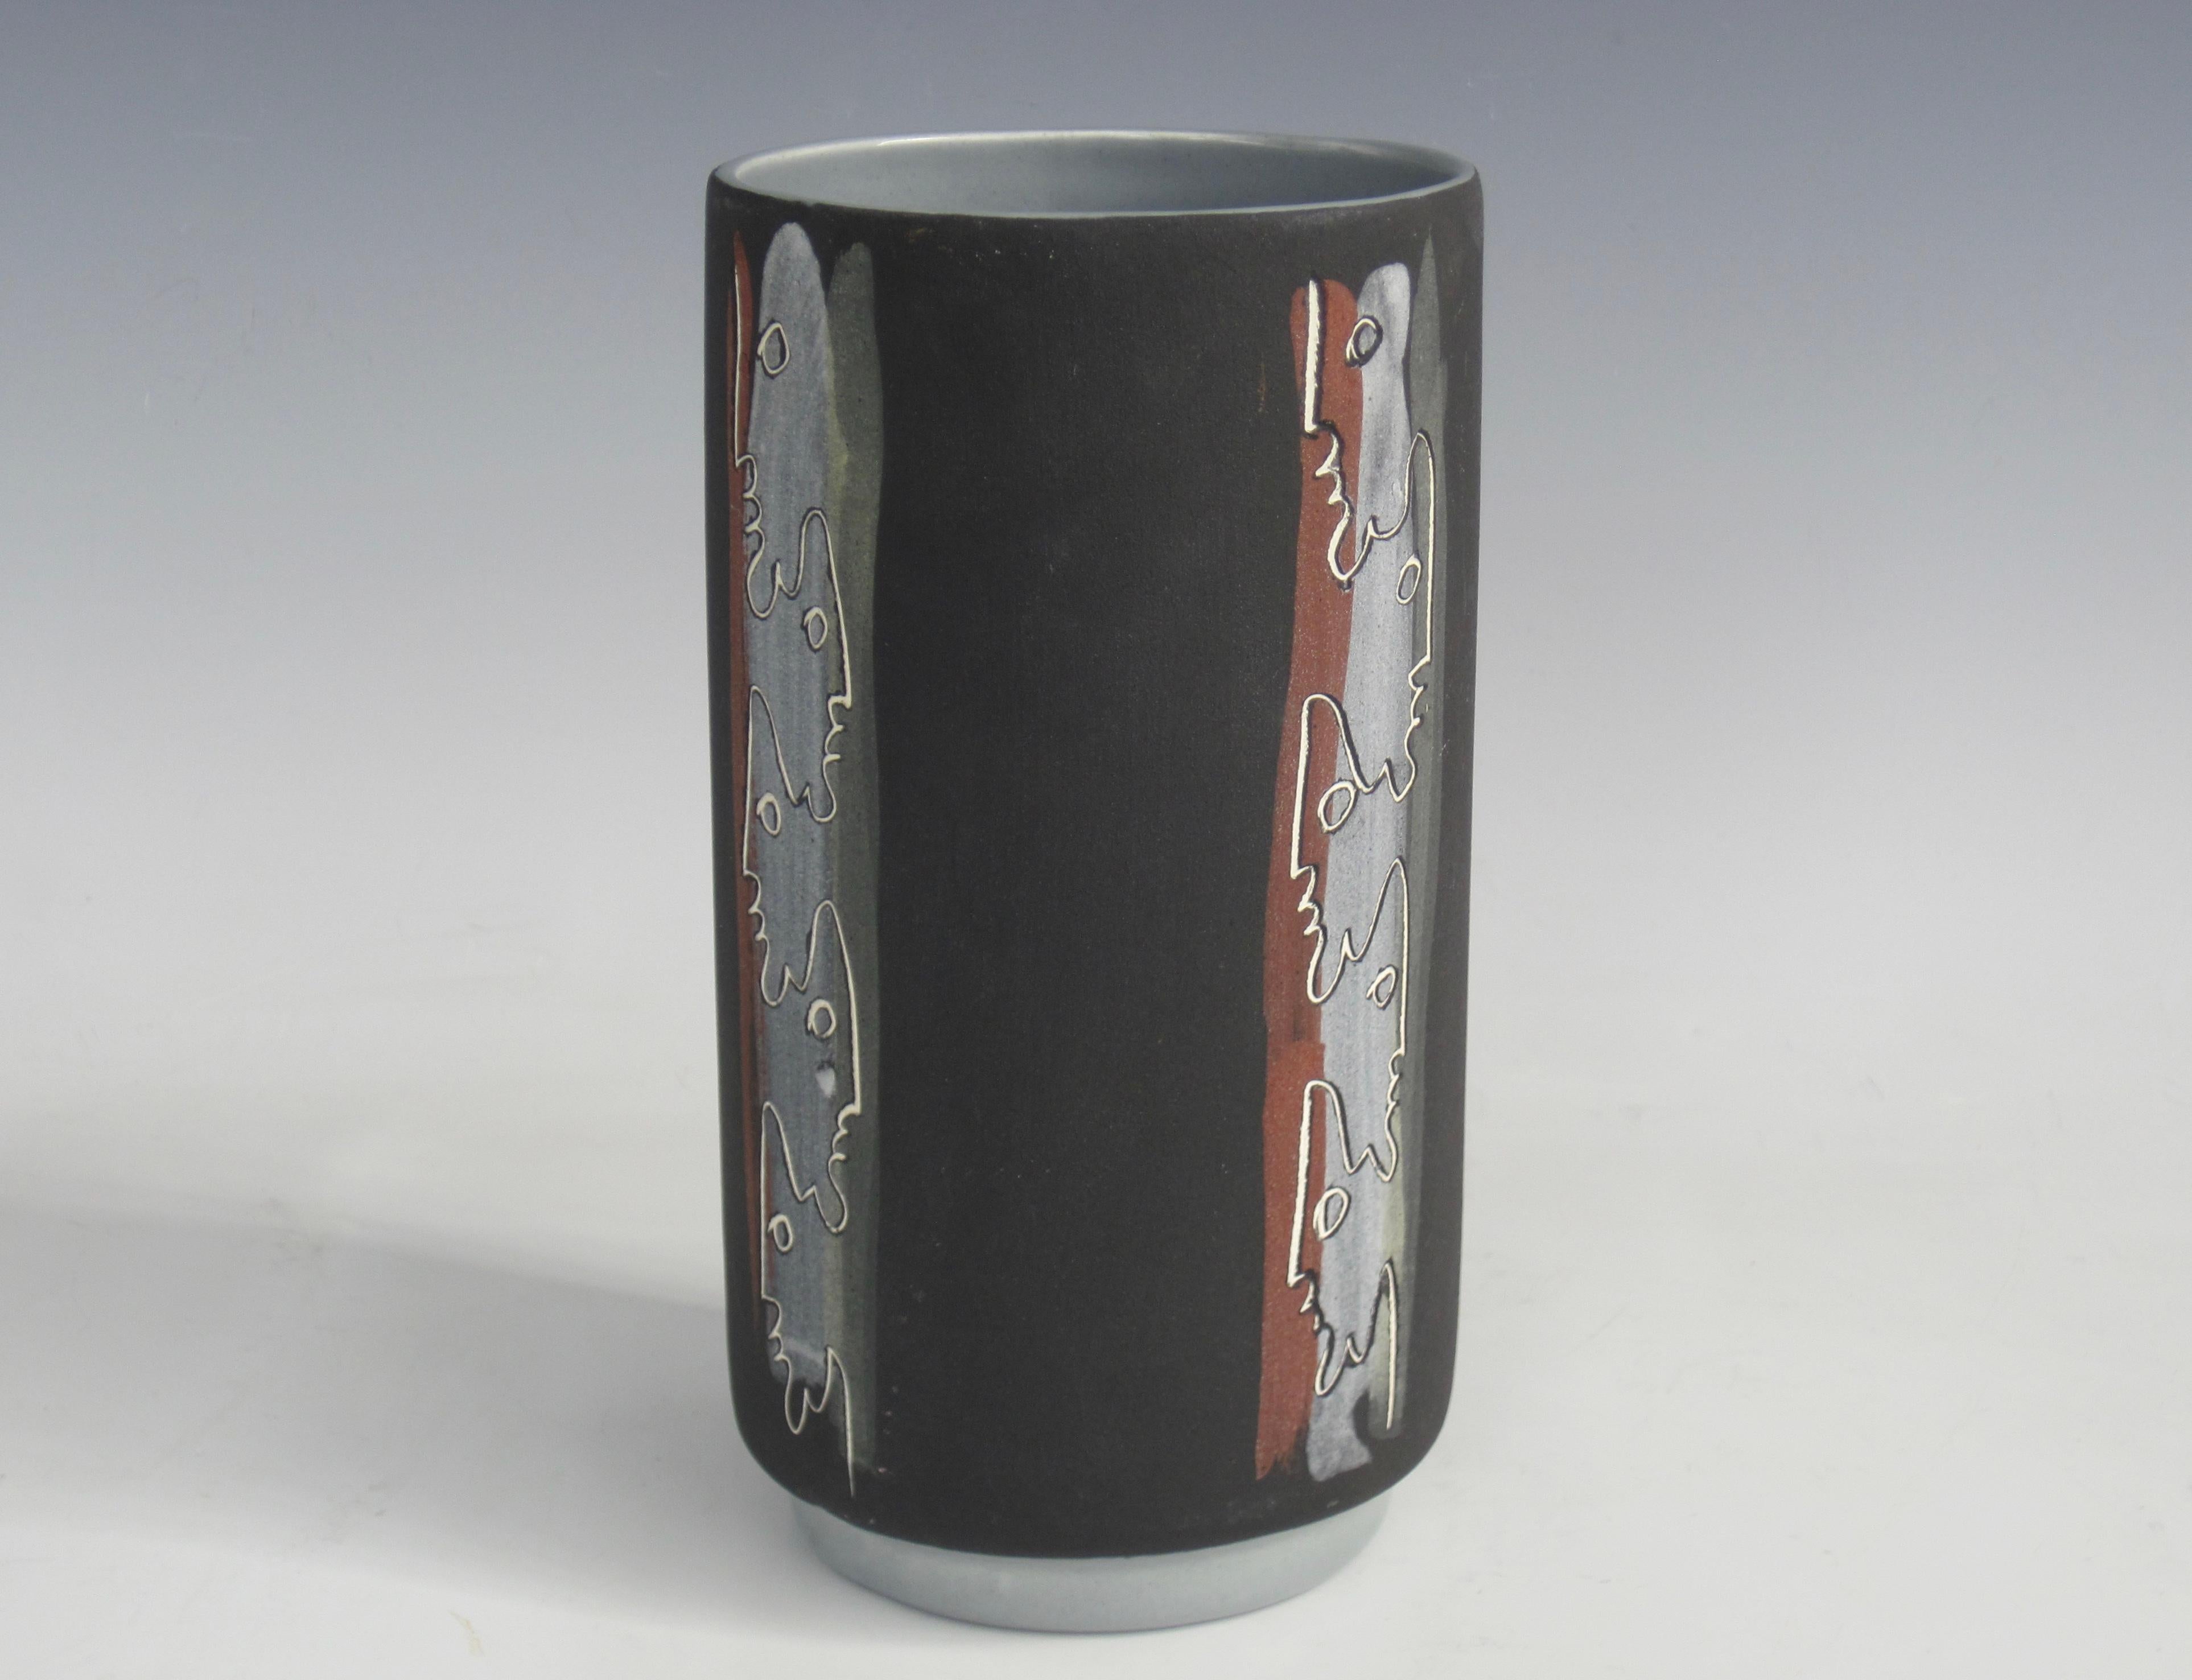 A mid-century tiki face vase by artist duo Charles and Alice Smith known as Chalice. This vase has alternating incised tiki silhouettes with brick red, gray and olive green vertical stripes on a coarse matte charcoal exterior. This interior is high